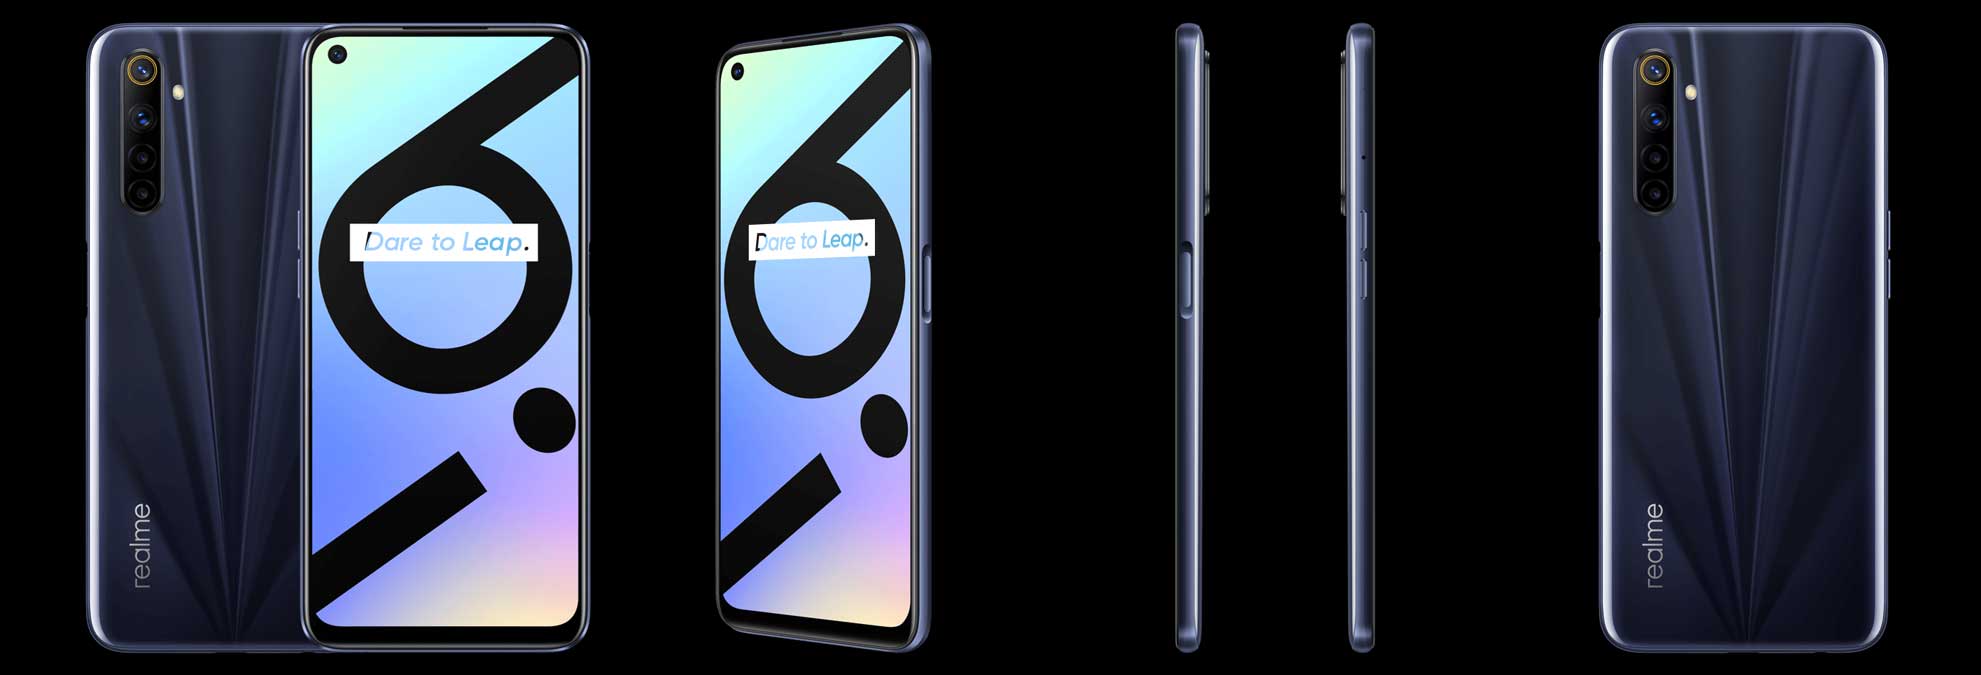 realme 6i specification & review in details